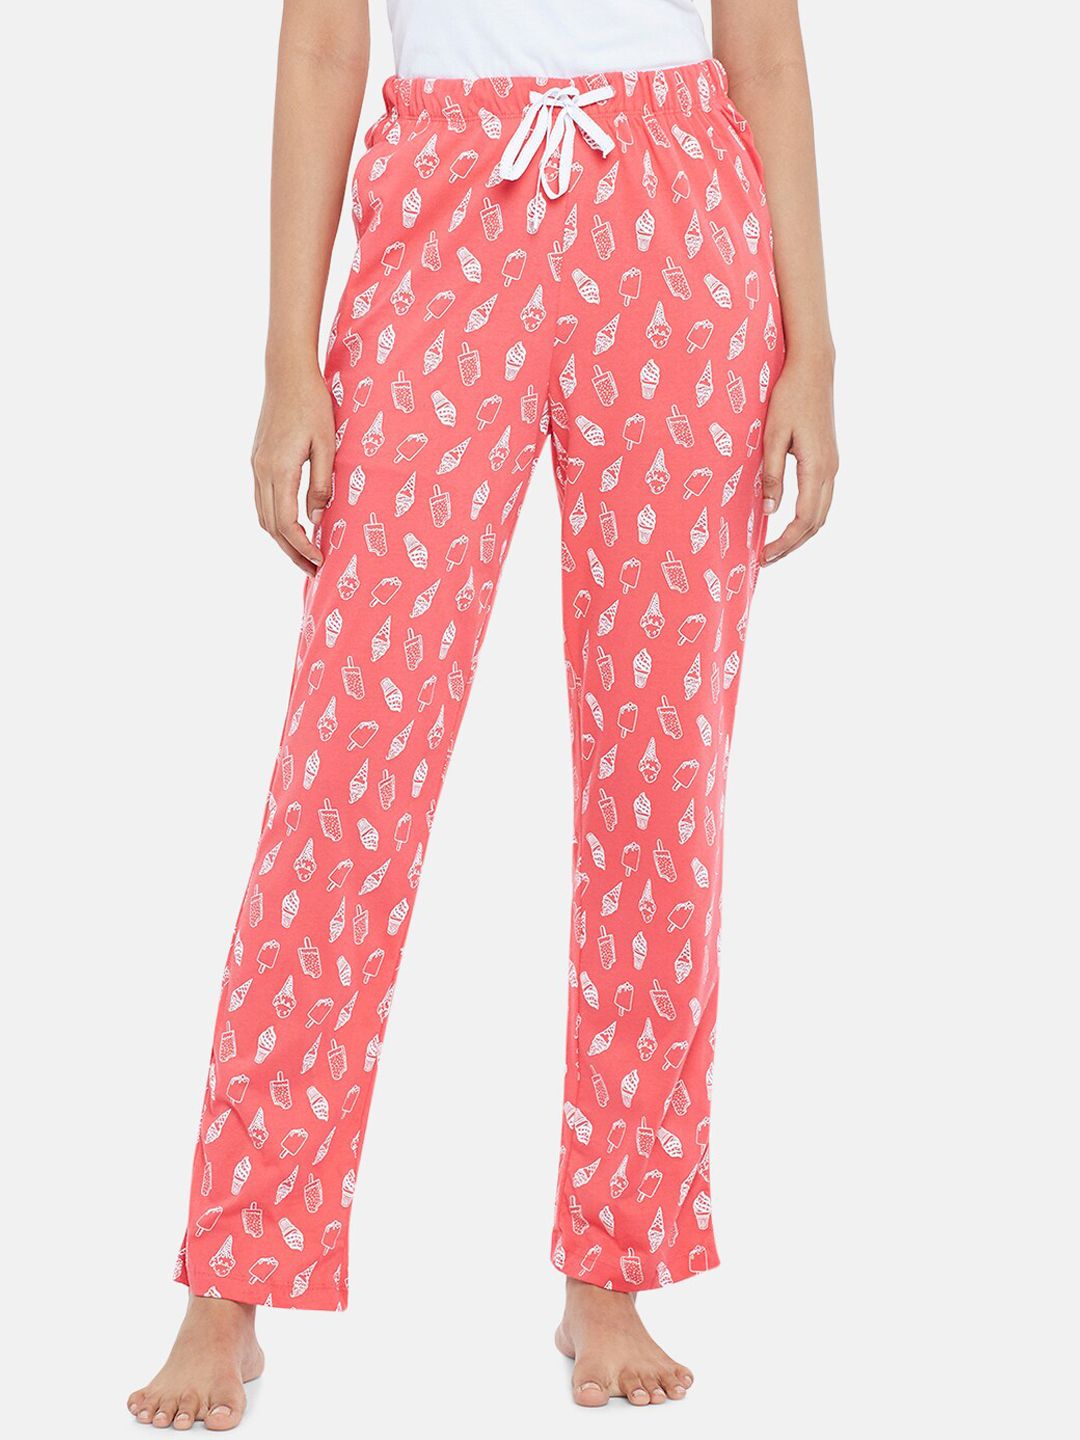 Dreamz by Pantaloons Girls Womens Pink Cotton Printed Lounge Pants Price in India